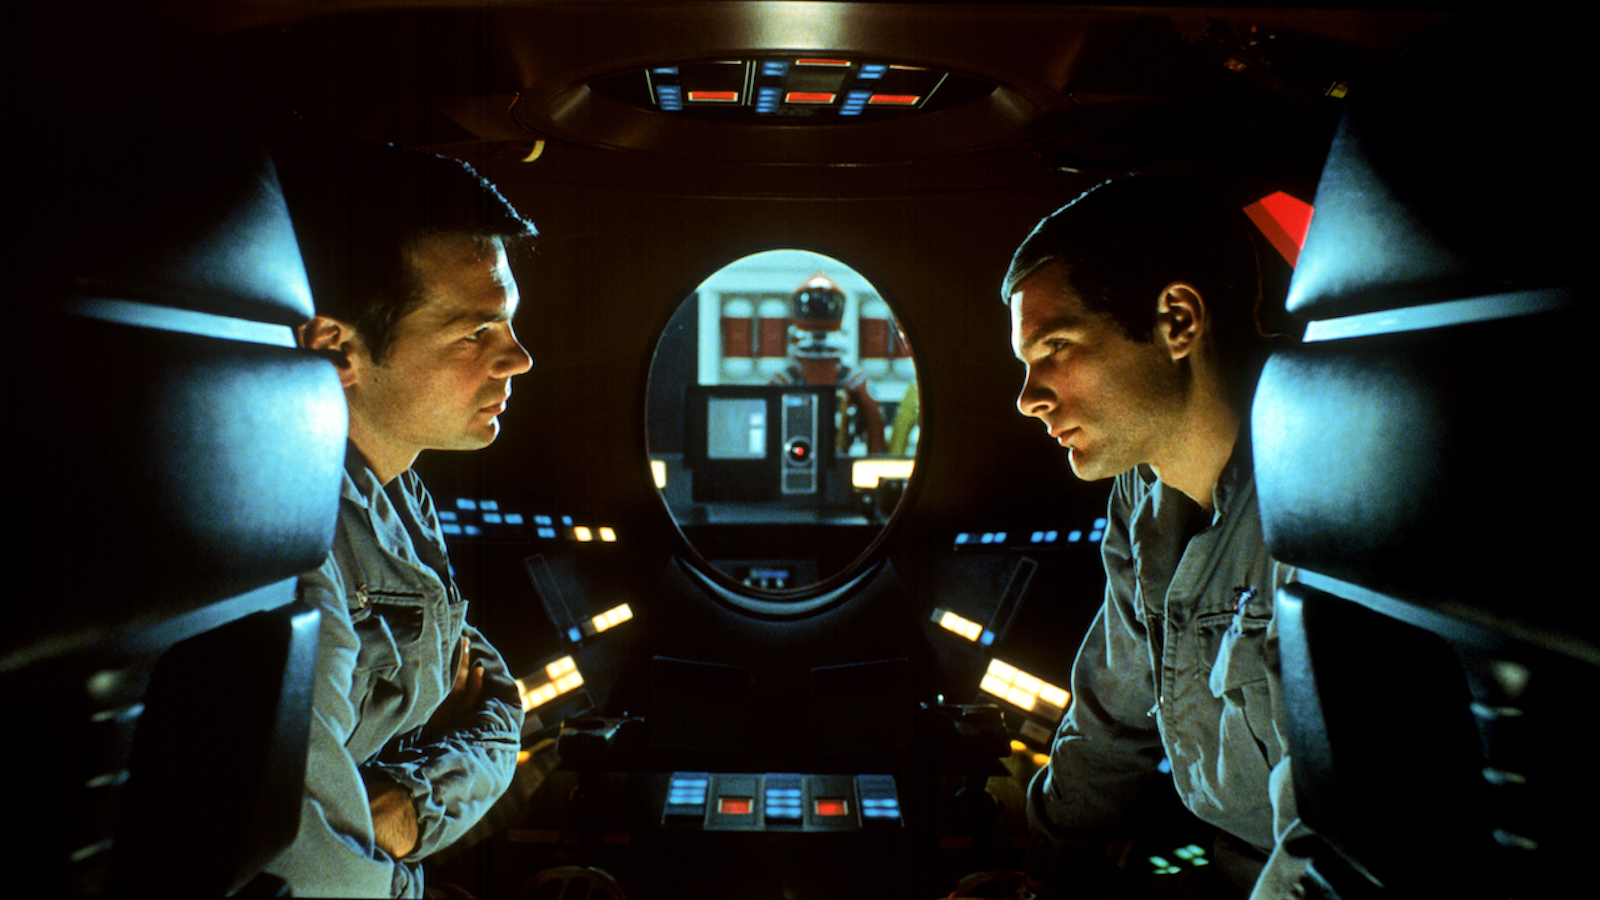 Two men speaking from the inside of space pod, their faces in profile